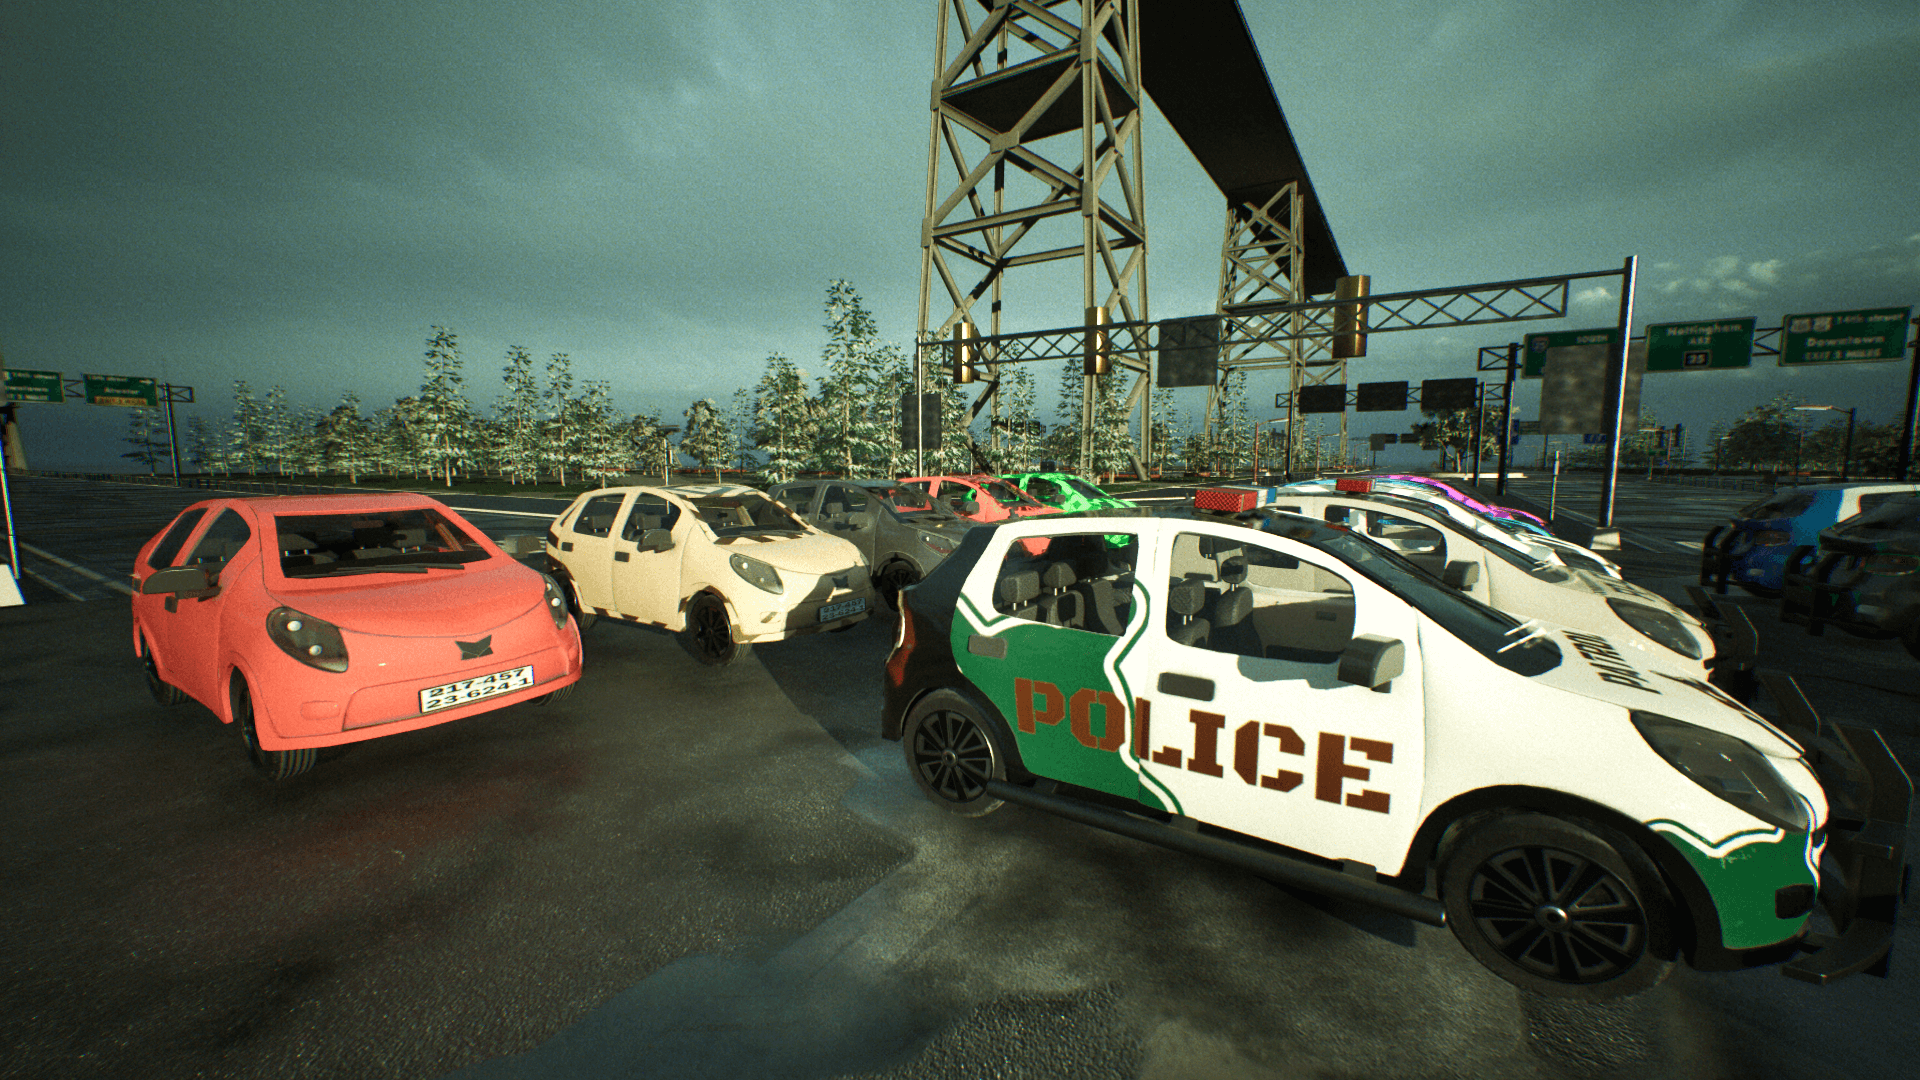 An image showing the Small Car Bundle, created with Unreal Engine.